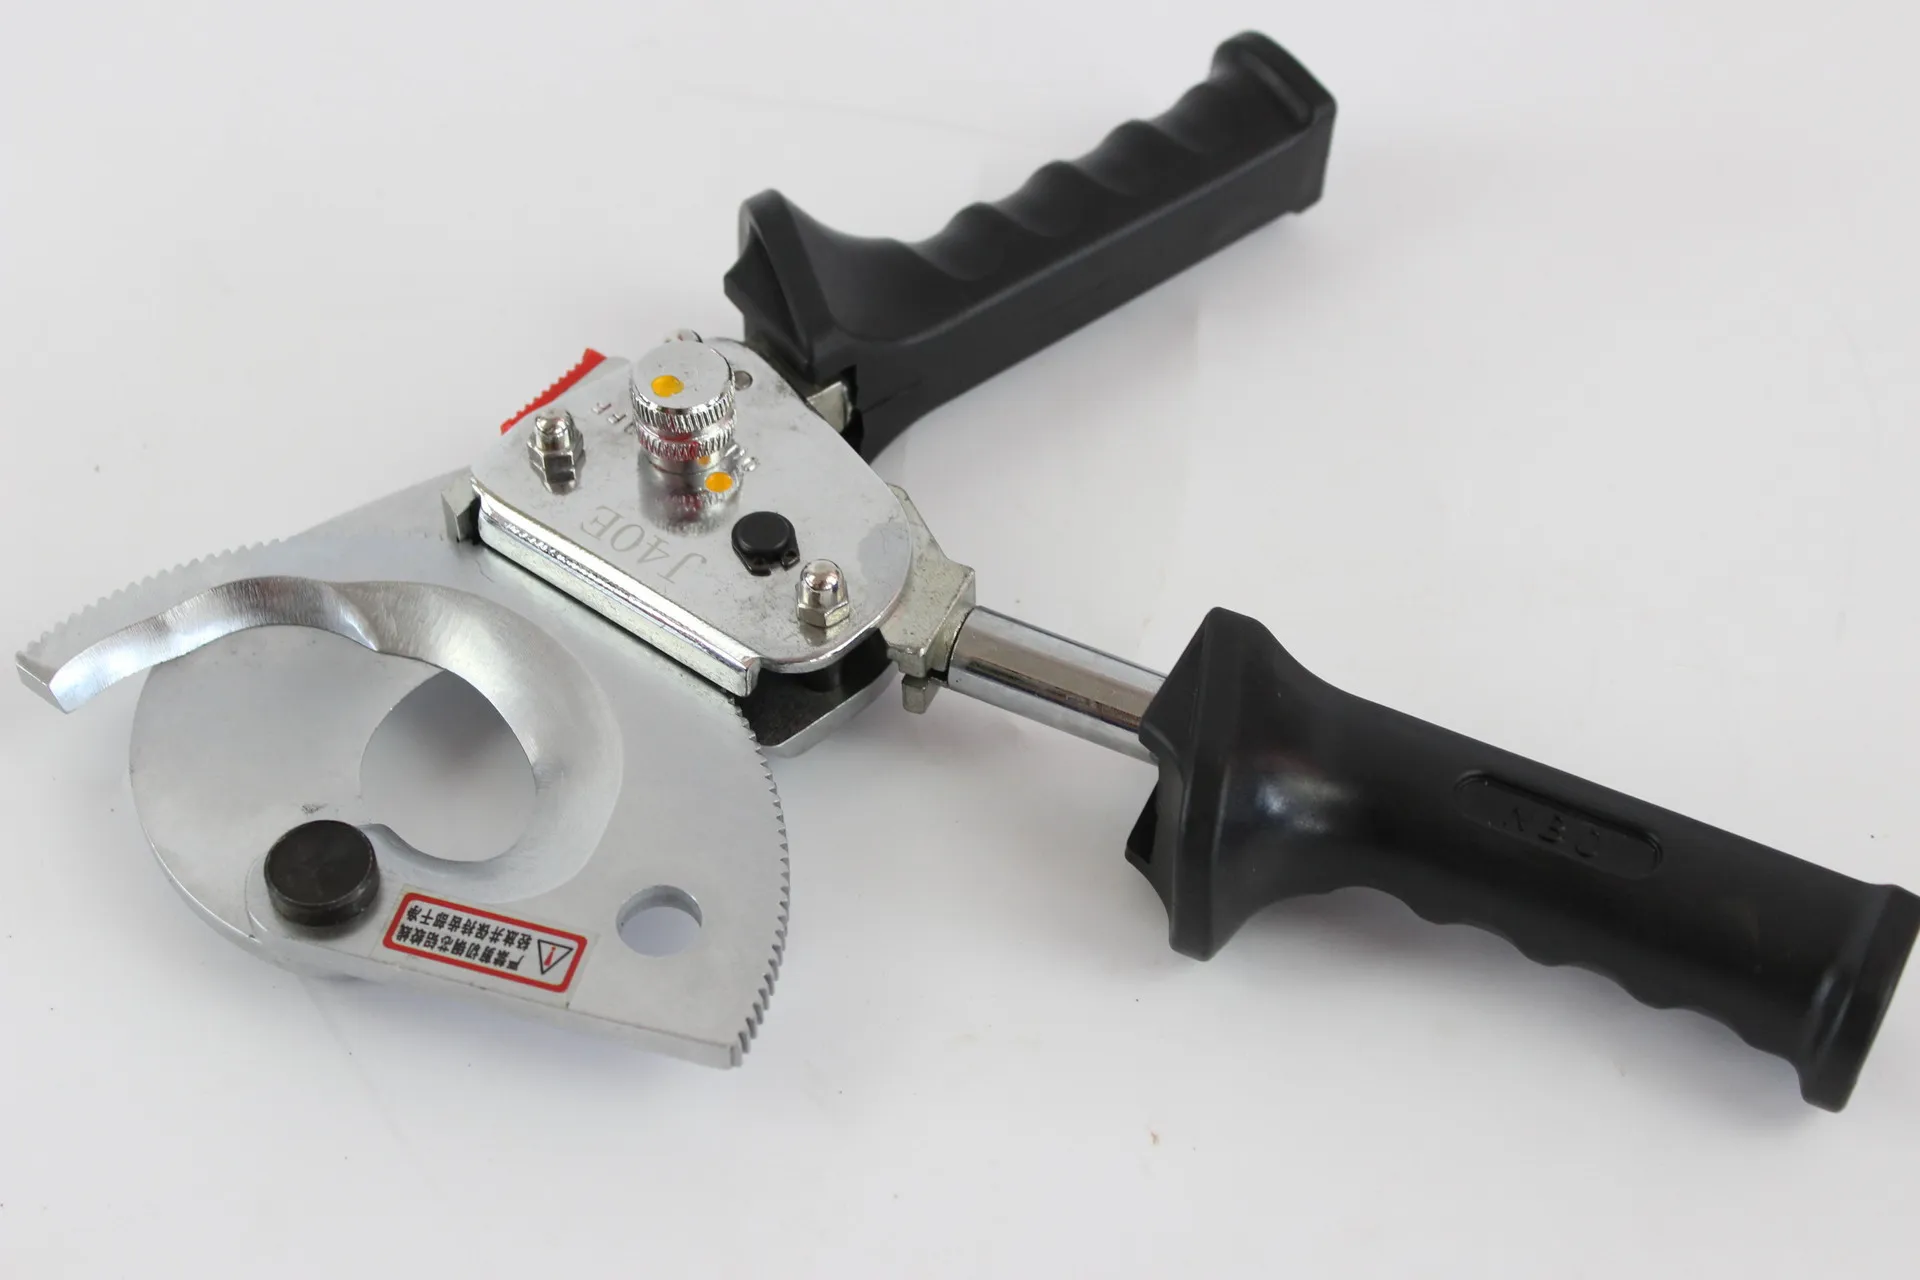 Heavy Duty Ratchet Cable Cutter Cut Up To 300mm2 Ratcheting Wire Cut Hand Tool